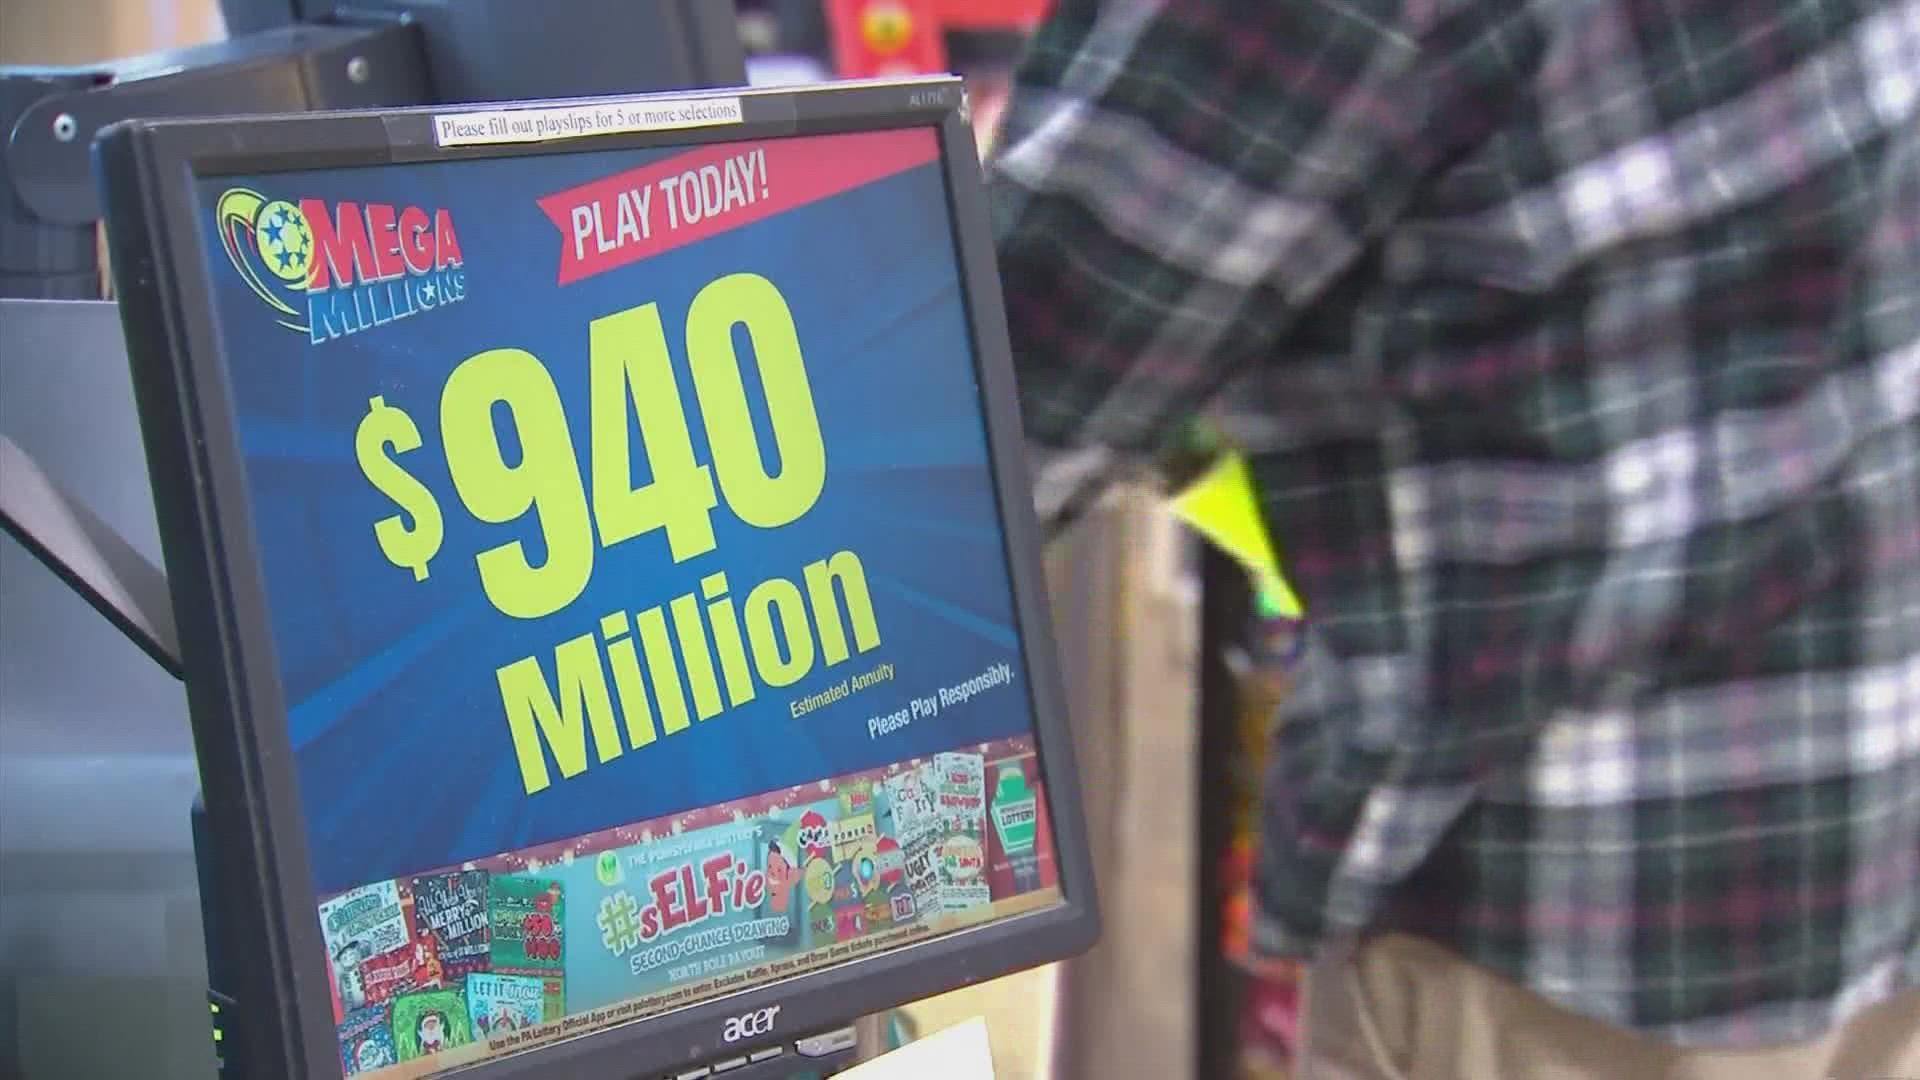 According to Tennessee Lottery, a Mega Millions player won $4 million in the drawing this past Friday. The winning ticket was sold at the Food City in LaFollette.